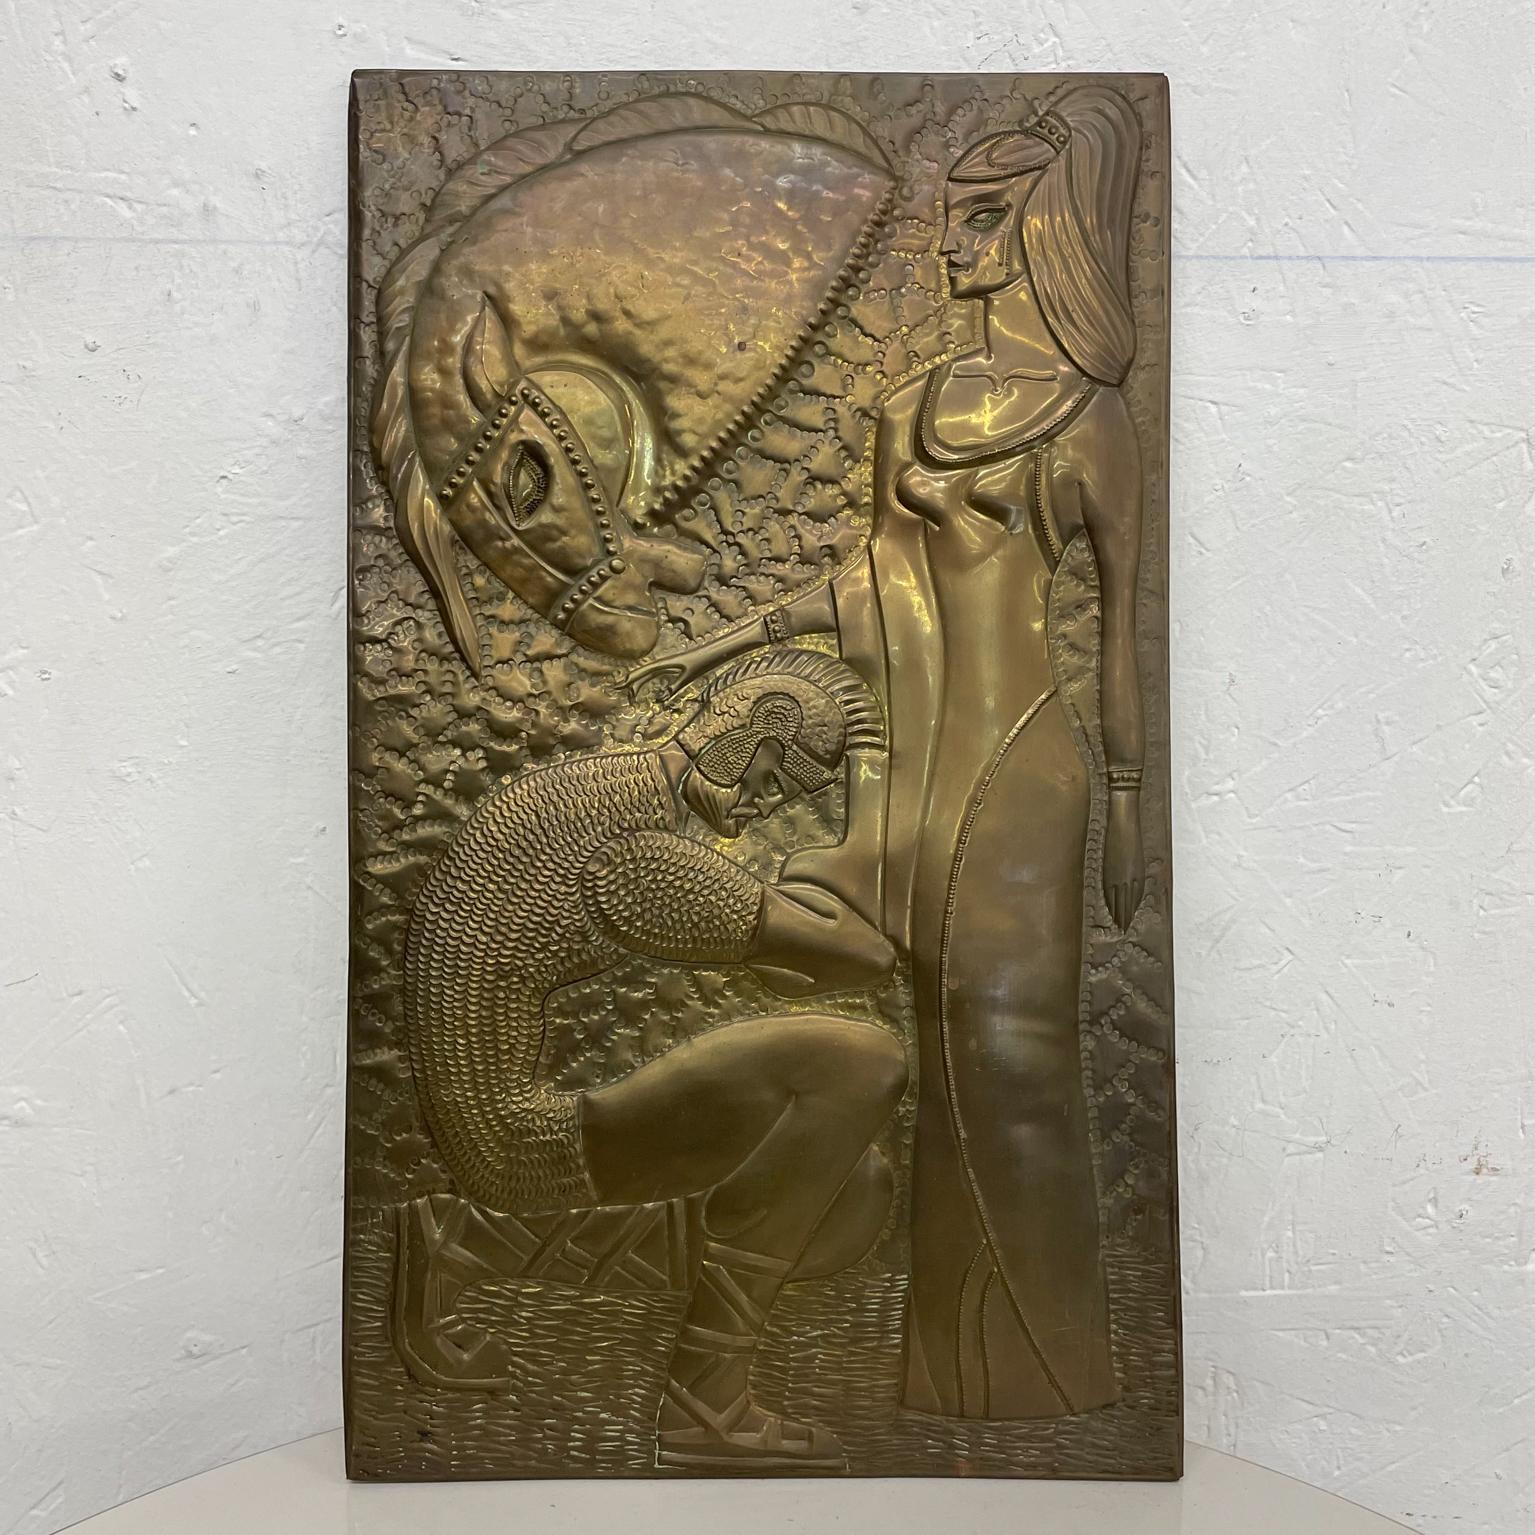 ART
Russian metal wall art in brass 
Soviet Art hammered brass relief work bended knee warrior soldier his horse and goddess queen
Label present on backside
11.38 w x 19.13 tall x .38 d
Preowned original vintage condition.
Refer to images.
 